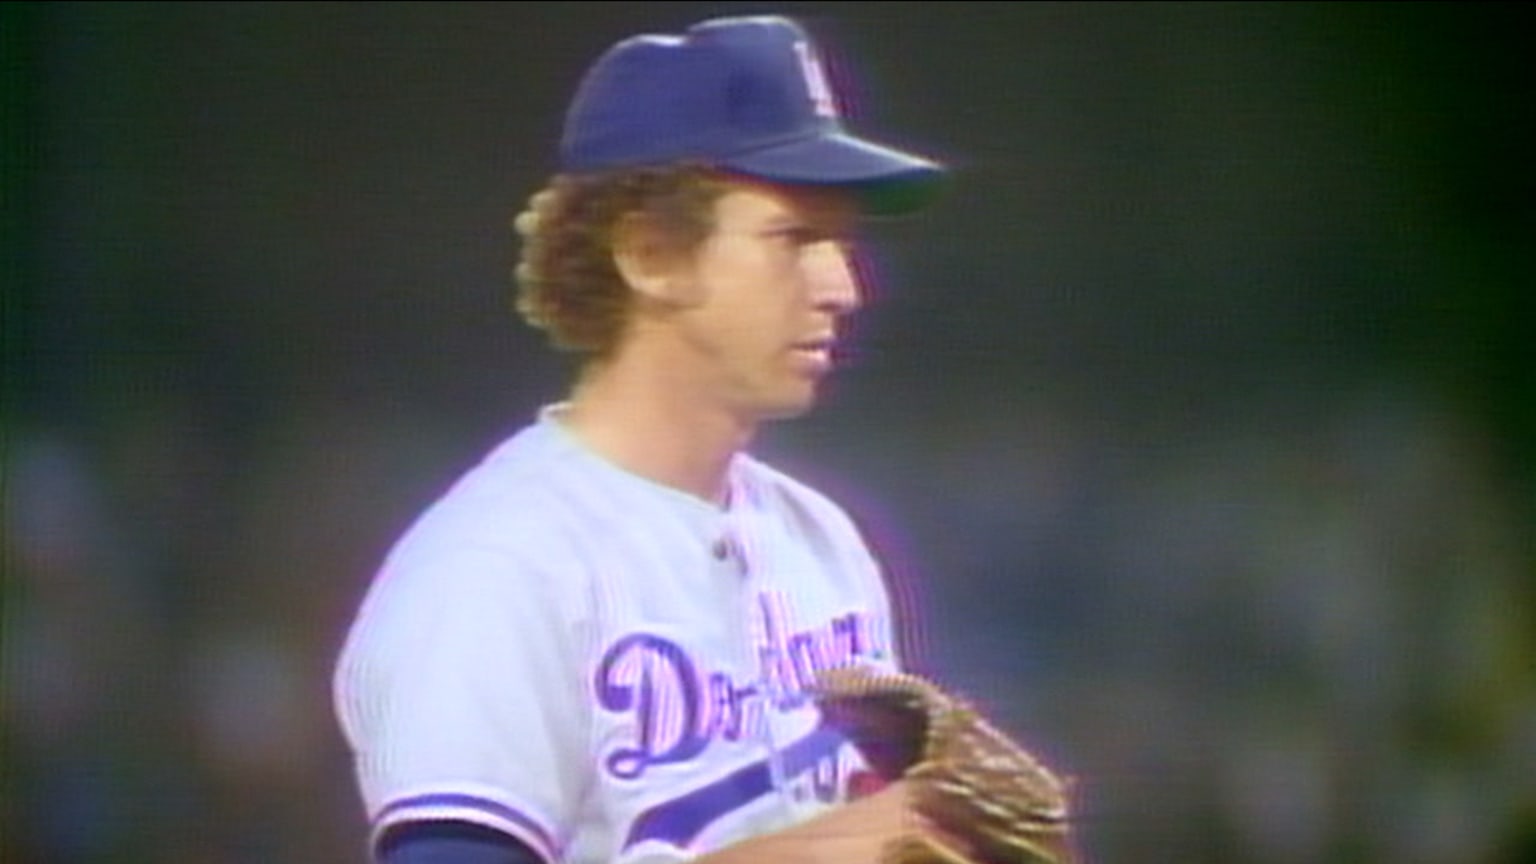 MLB Tonight remembers Don Sutton | 01/19/2021 | Milwaukee Brewers